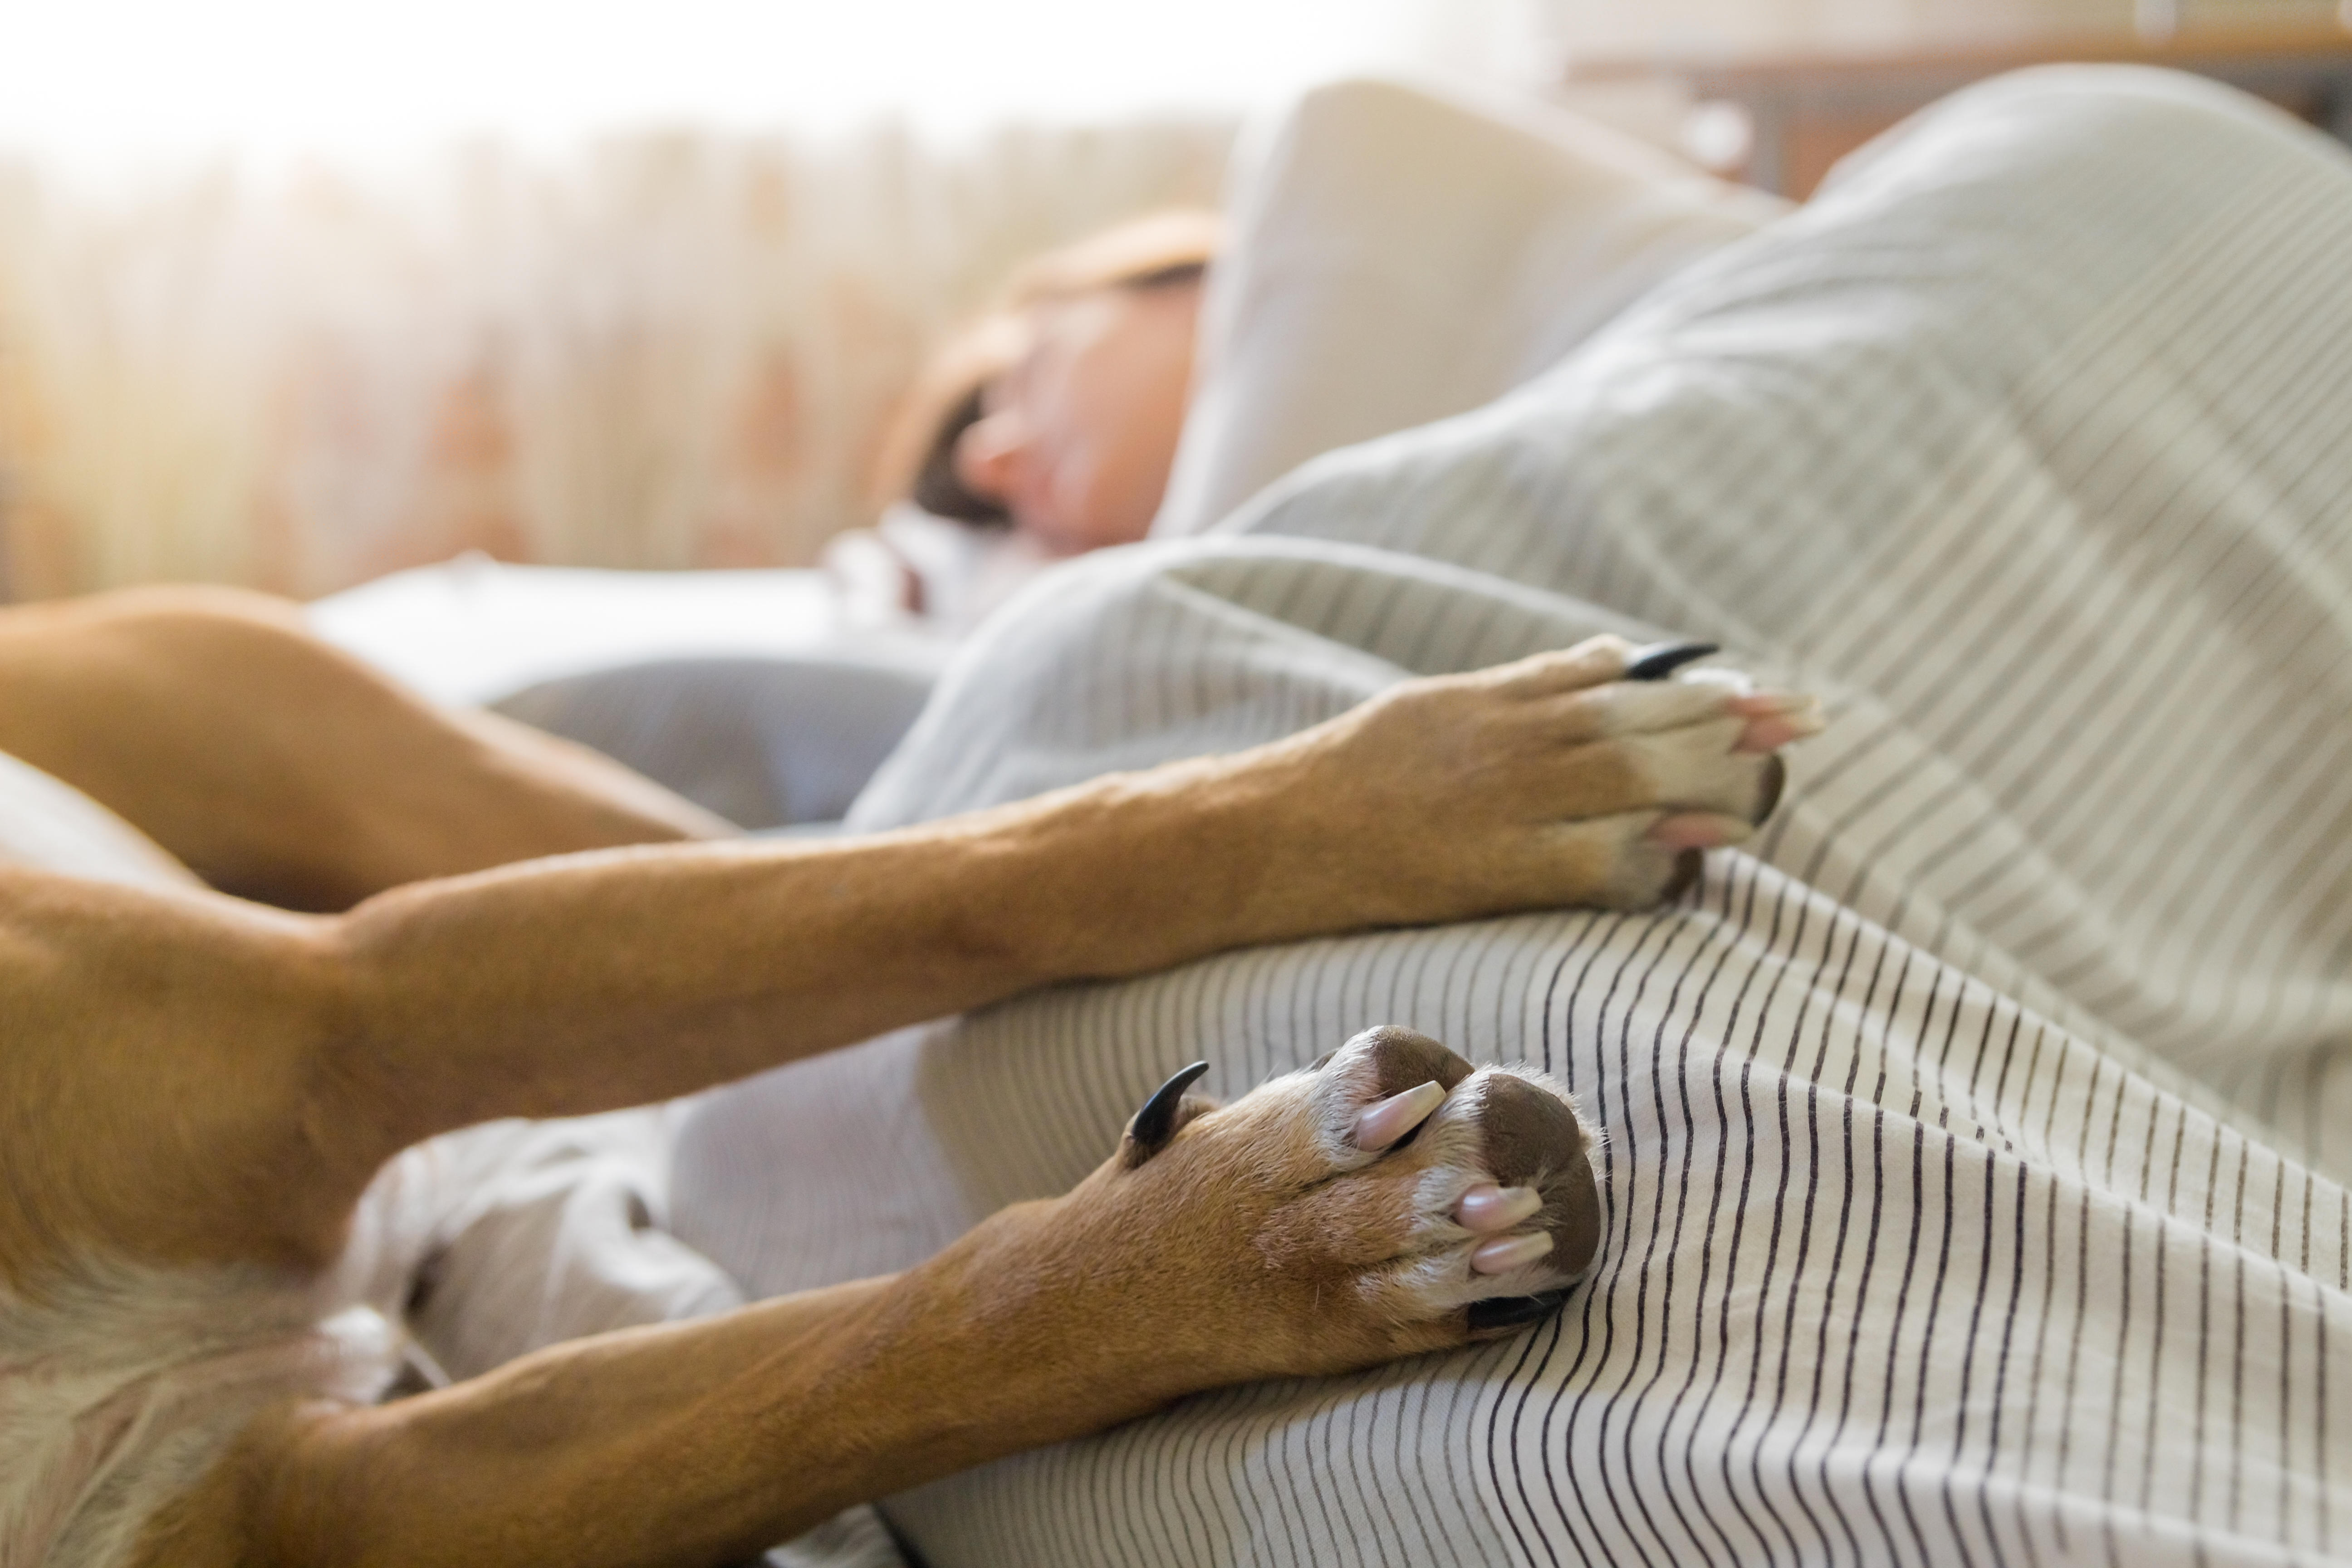 should your dog sleep in the bedroom